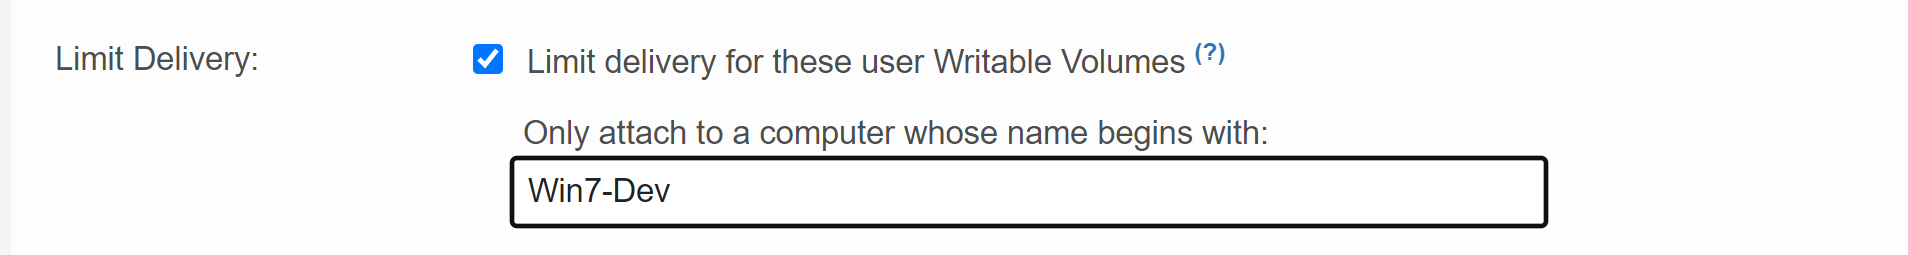 Limit Delivery option allows you to attach a Writable Volume to a specific computer by providing a text box to mention the computer name.